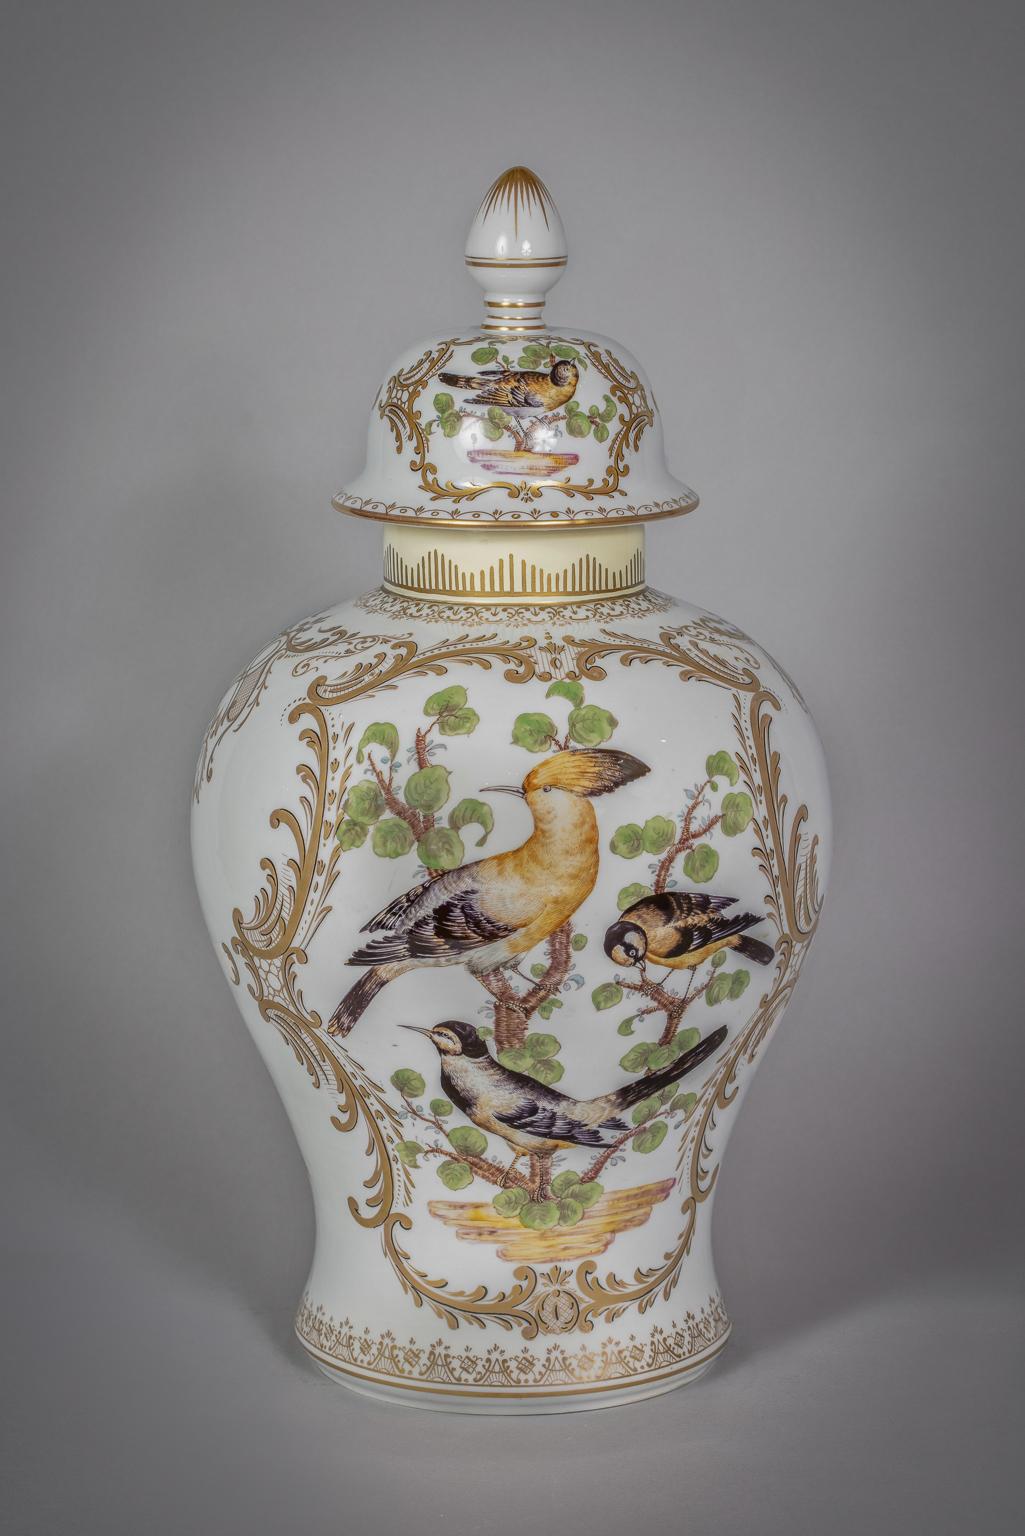 Painted on either side with birds on panels, the cover similarly decorated. With a 19th century Hochst underglaze blue mark.